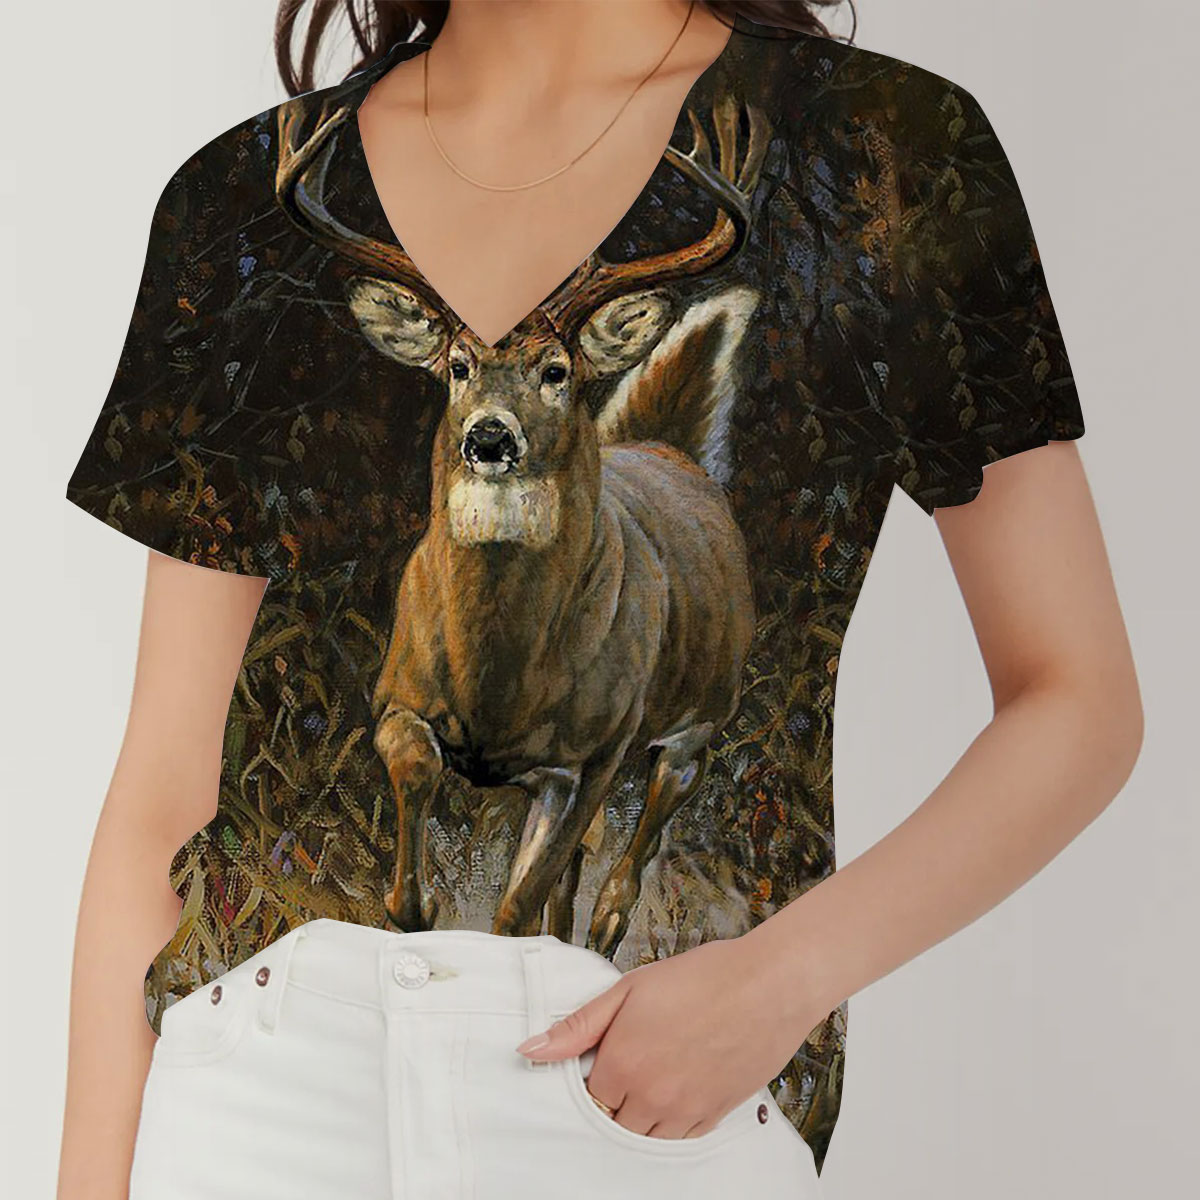 Deer Hunting In The Forest V-Neck Women's T-Shirt_1_2.1